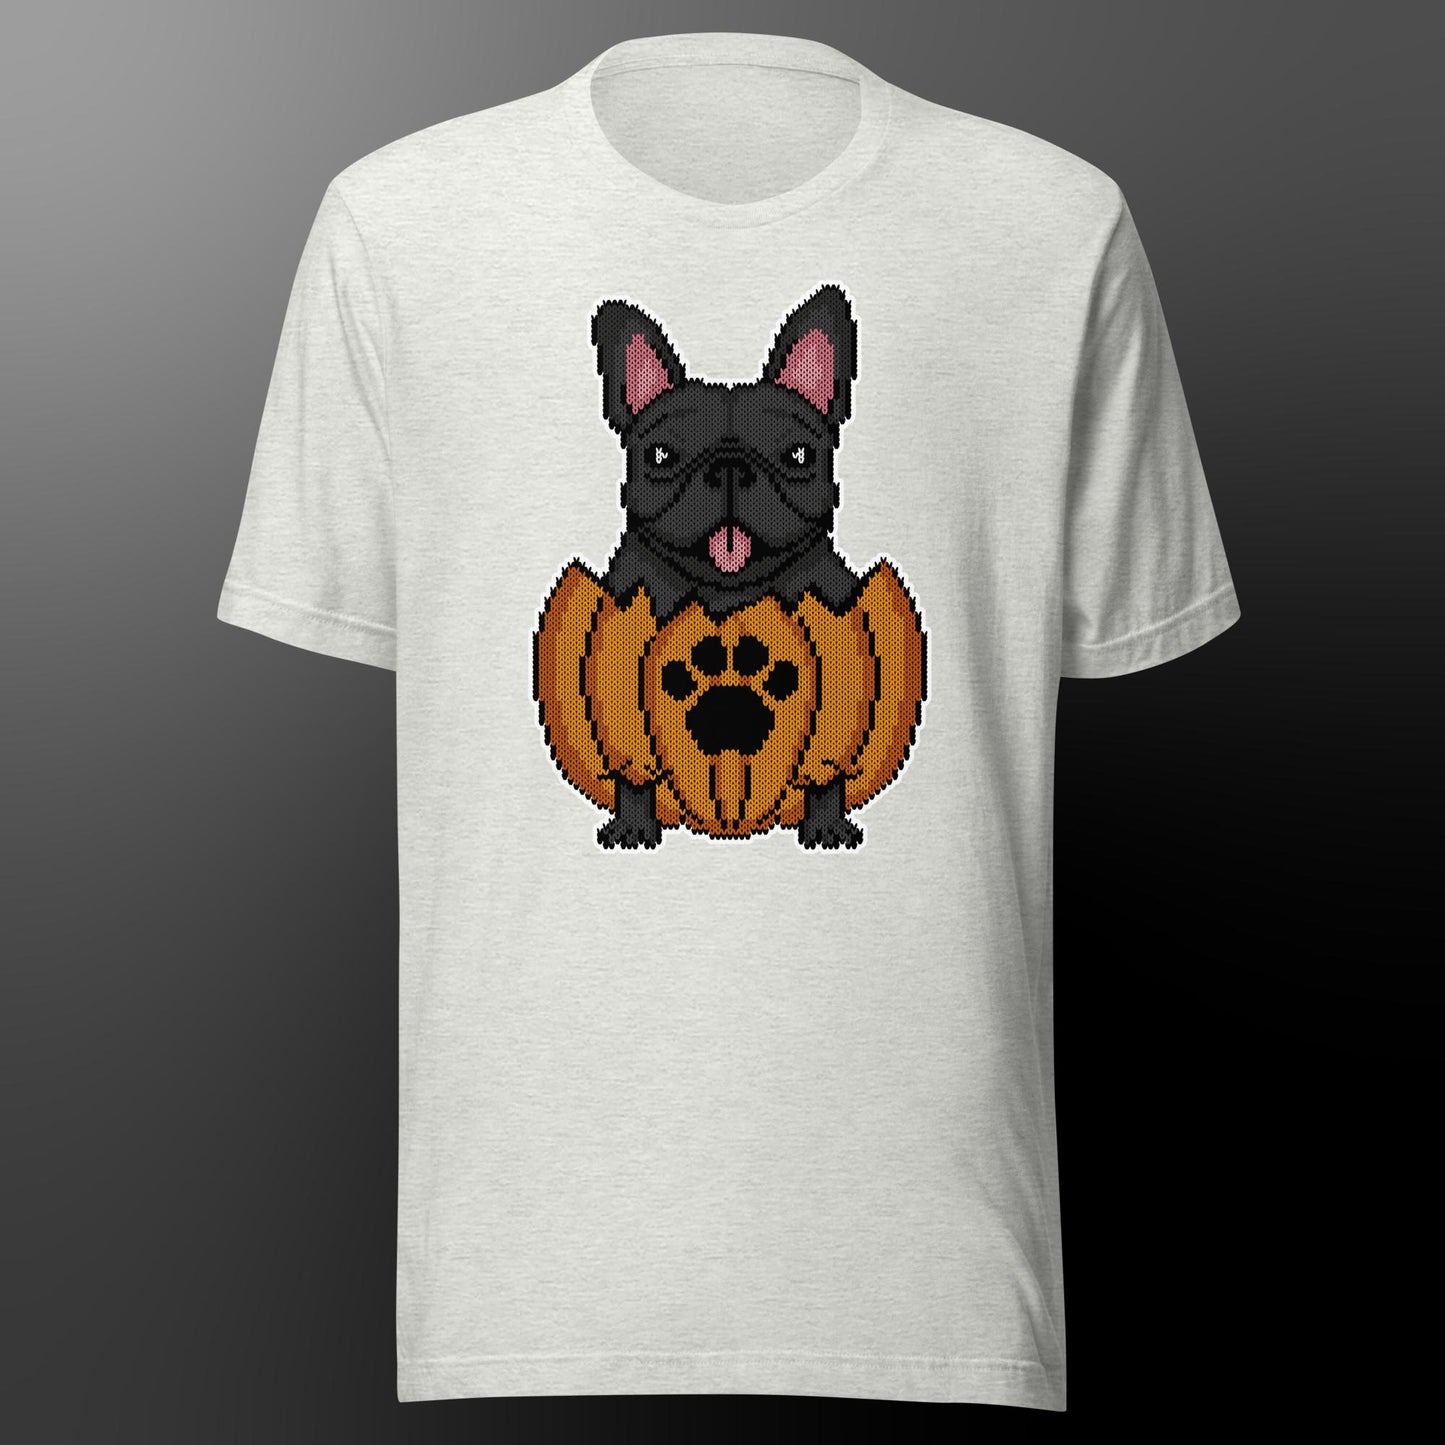 Halloween shirt with frenchie (fur color black)